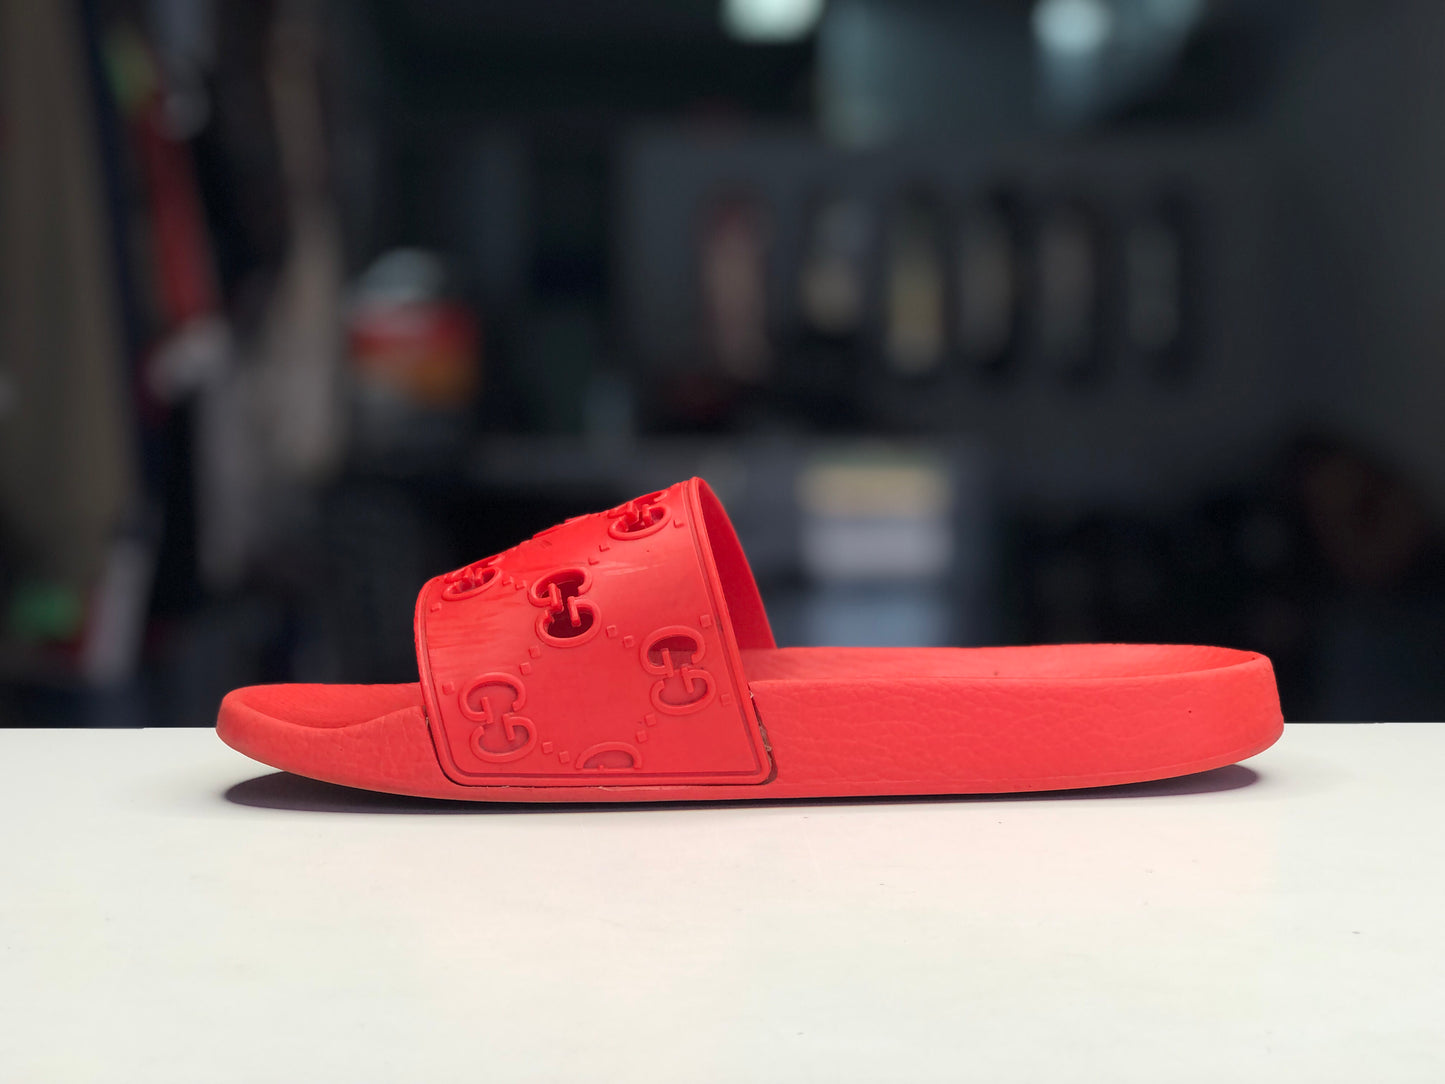 Gucci Red Rubber Slide size 8G